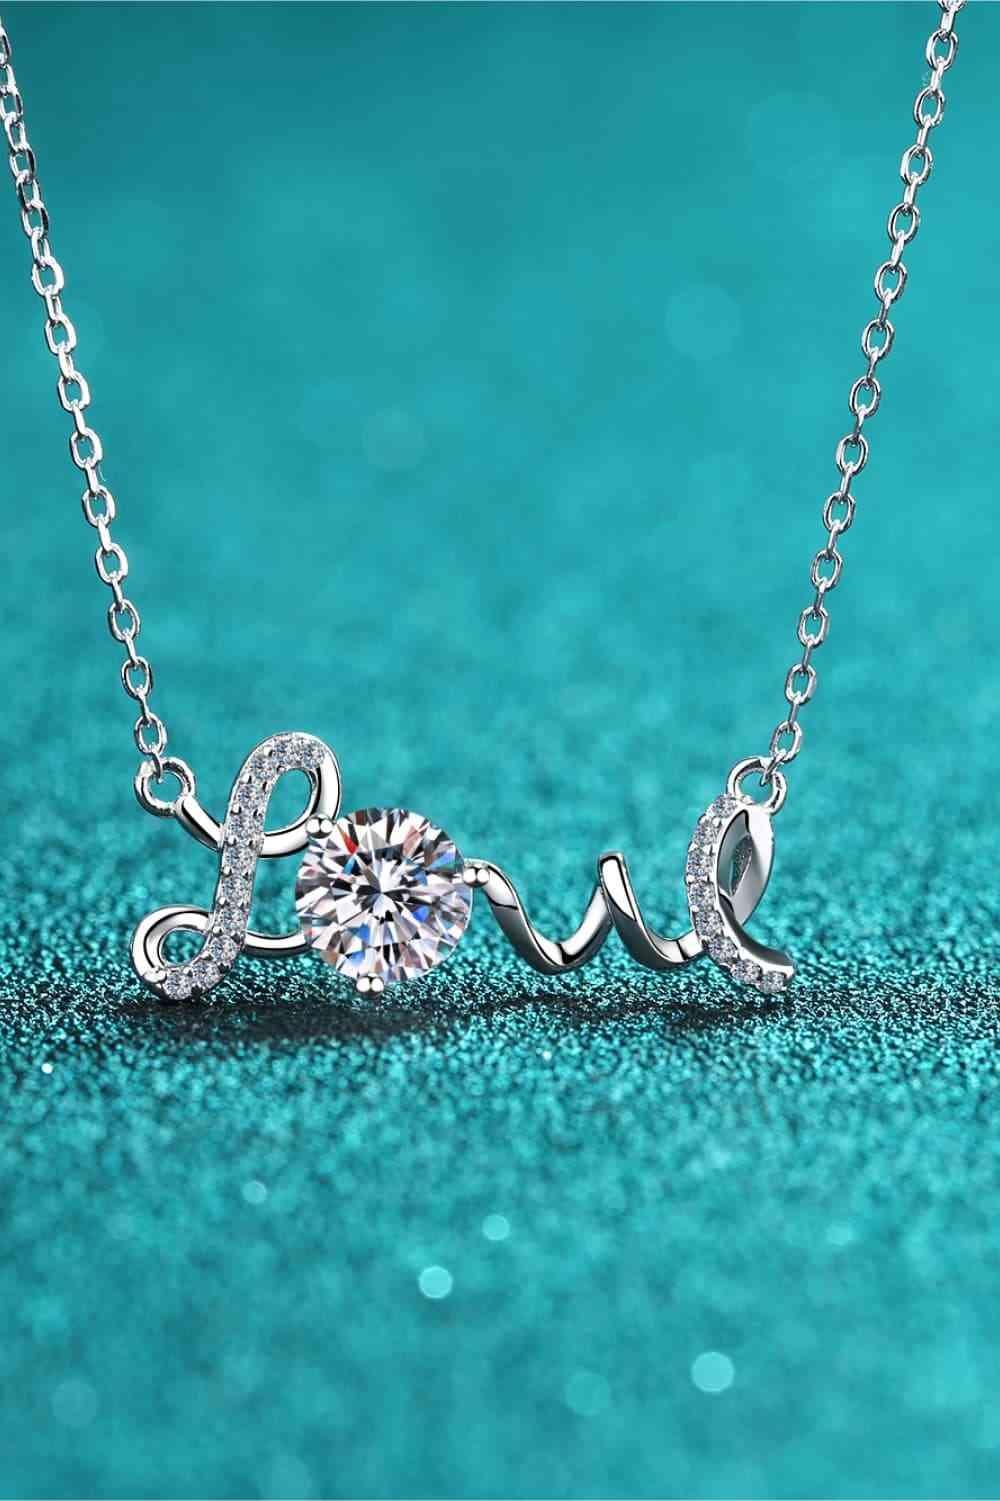 Elegant 1 Carat Moissanite Sterling Silver Necklace with Zircon Accents - Certified with Warranty